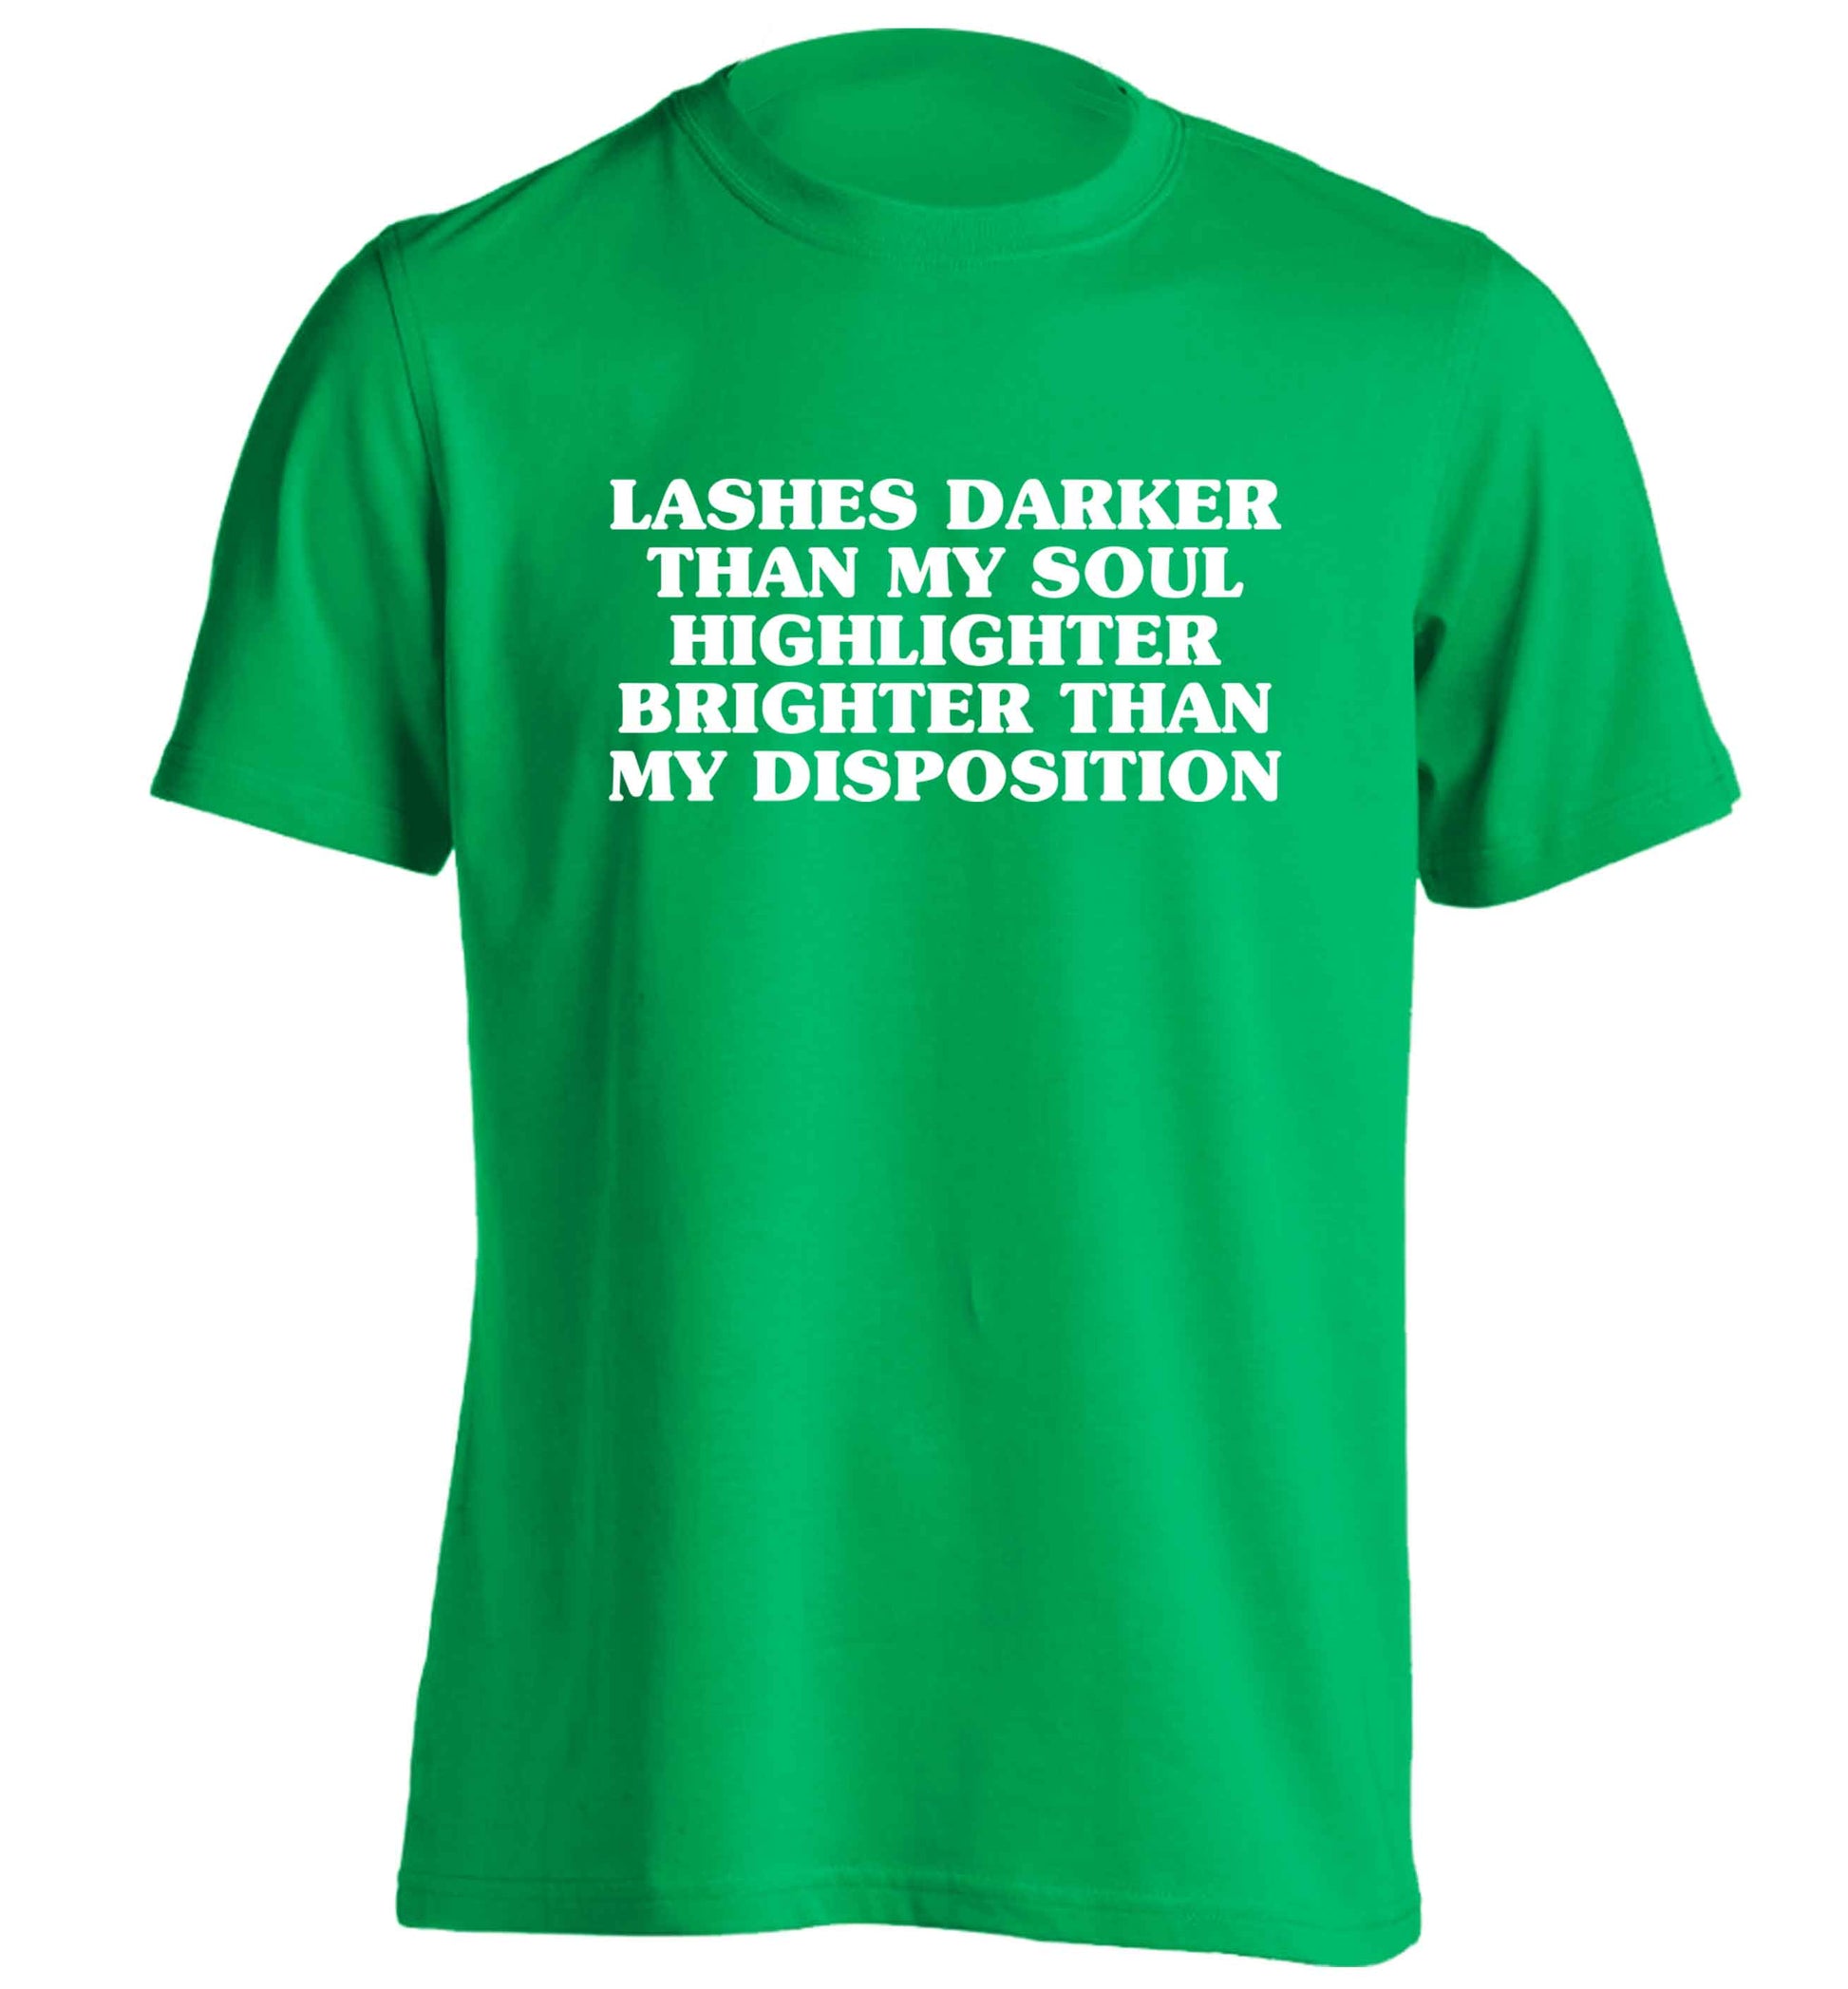 Lashes darker than my soul, highlighter brighter than my disposition adults unisex green Tshirt 2XL